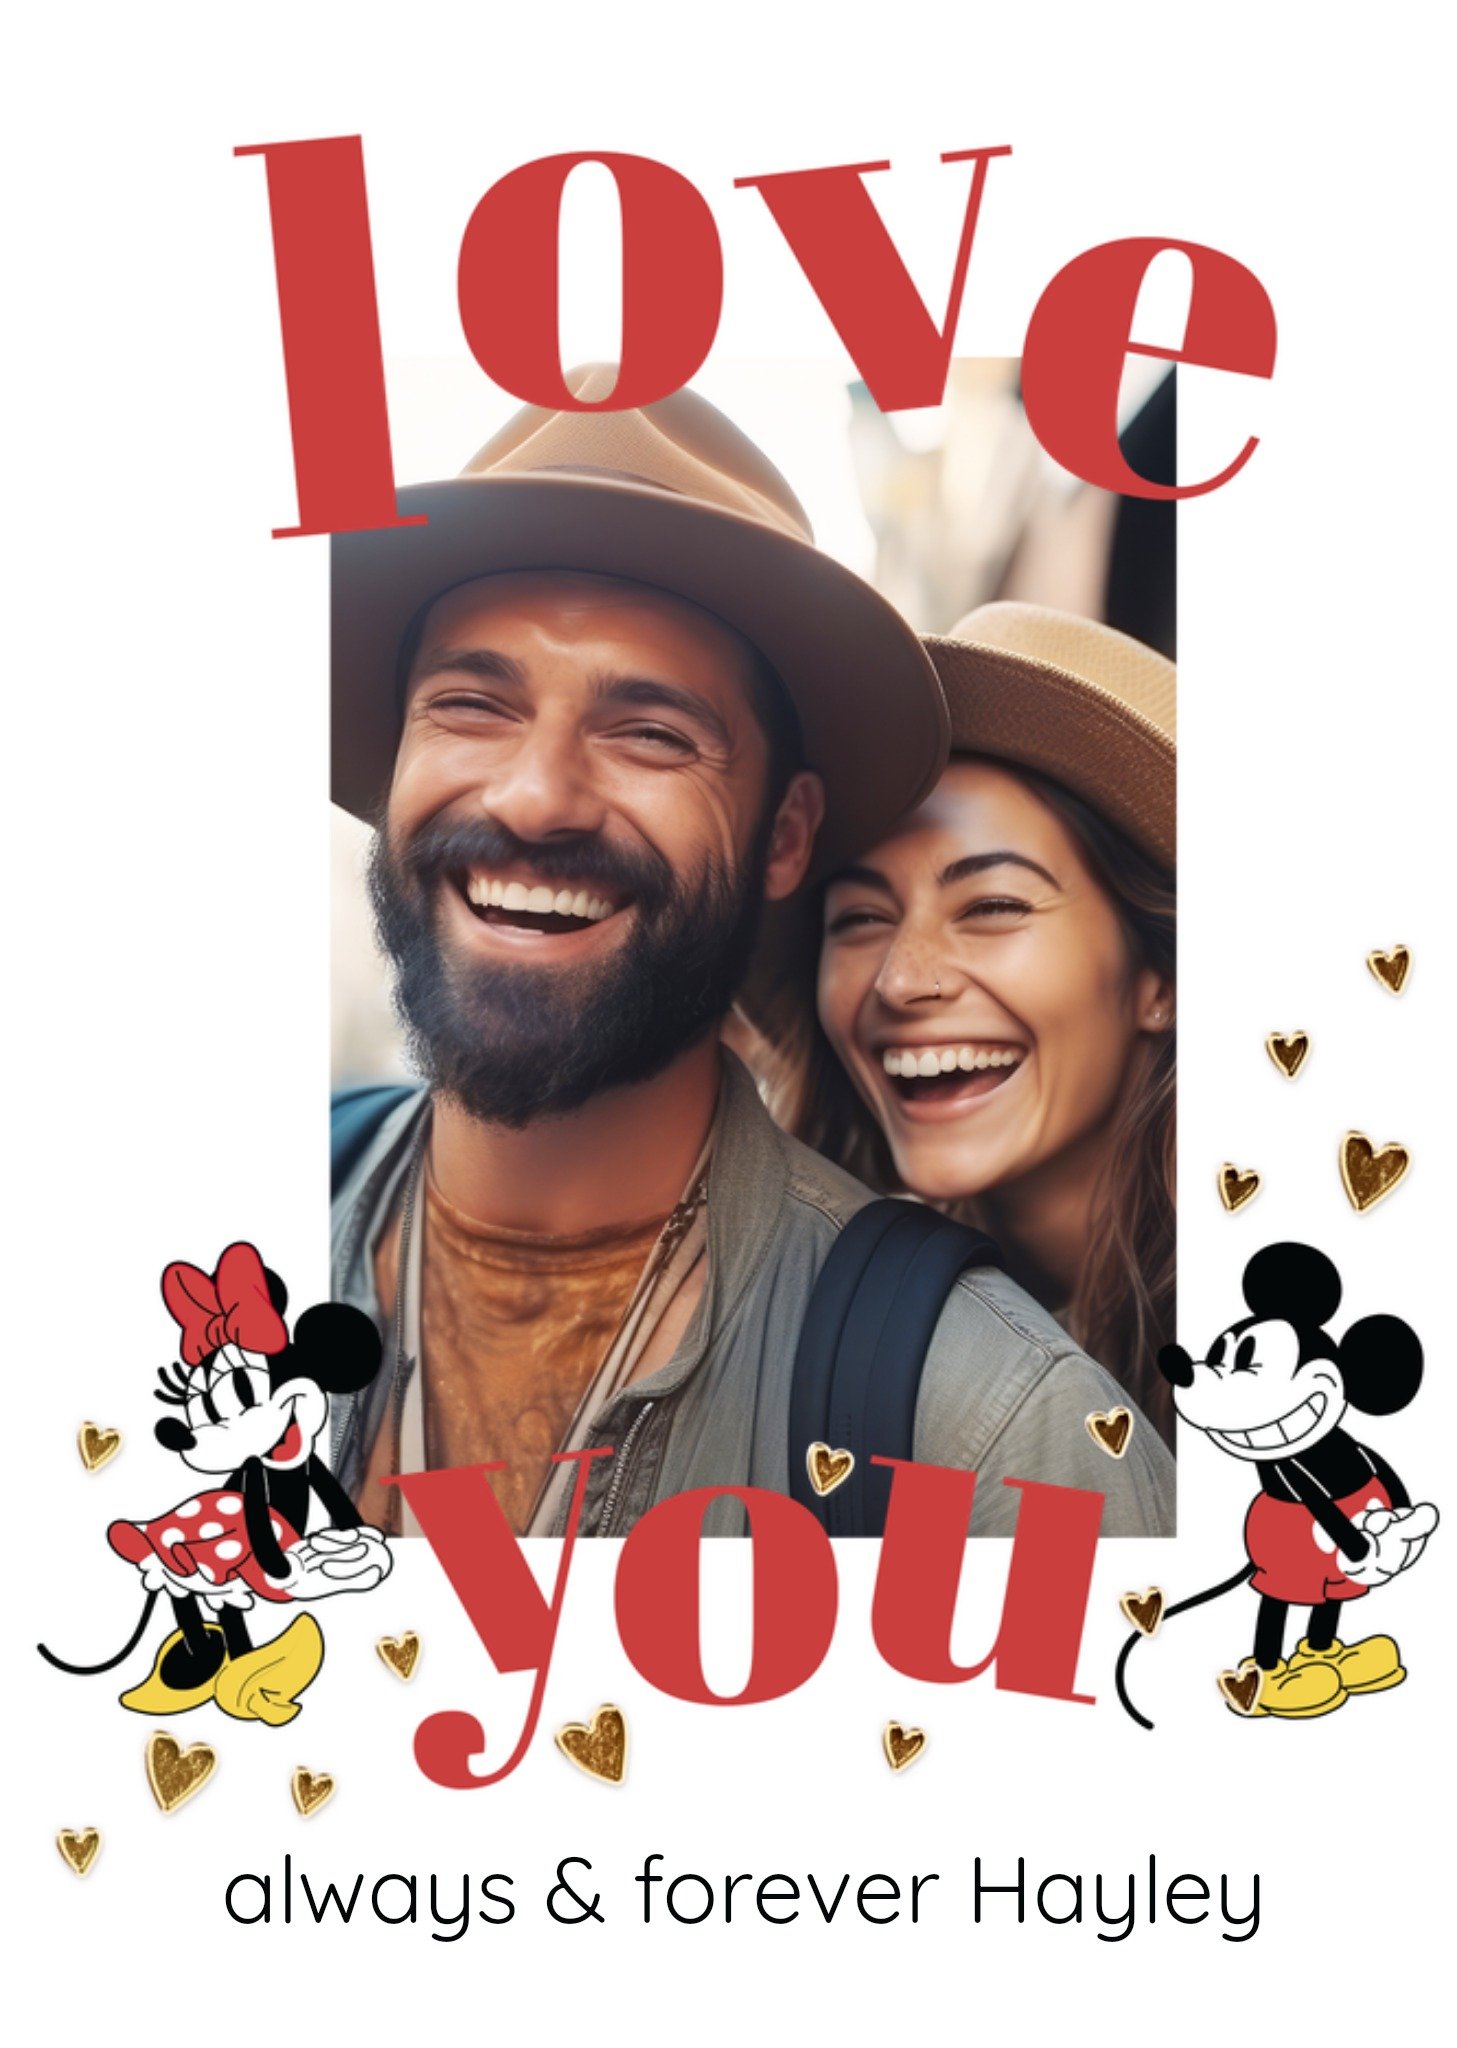 Disney Mickey Mouse Photo Upload Love You Card Ecard